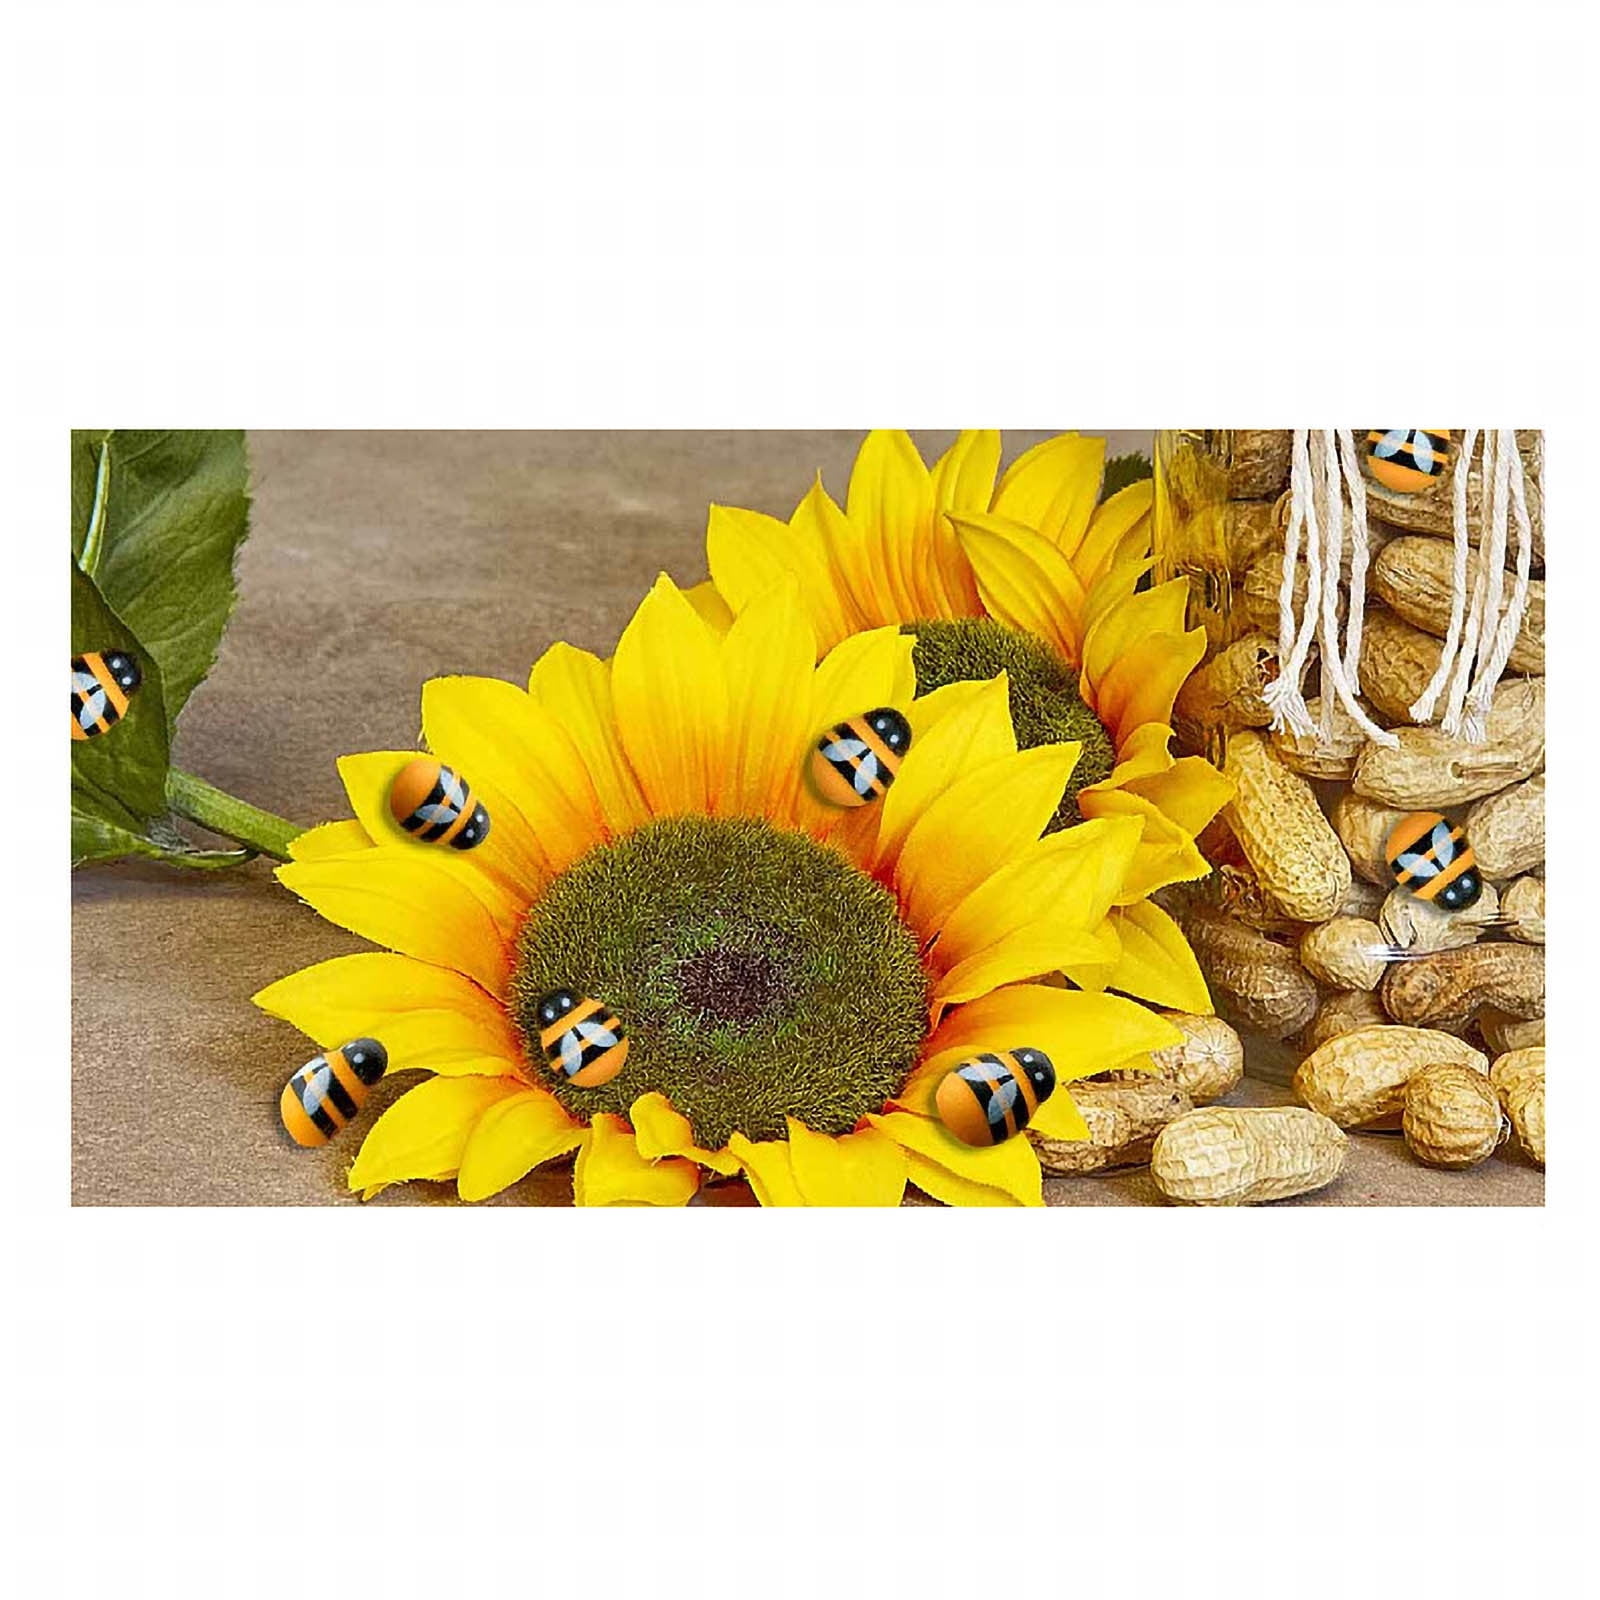 solacol Bee Decorations for Home Retro Welcome Iron Wall Decoration Bee  Sunflower Beetle Wreath Decor Farmhouse Wall Decor